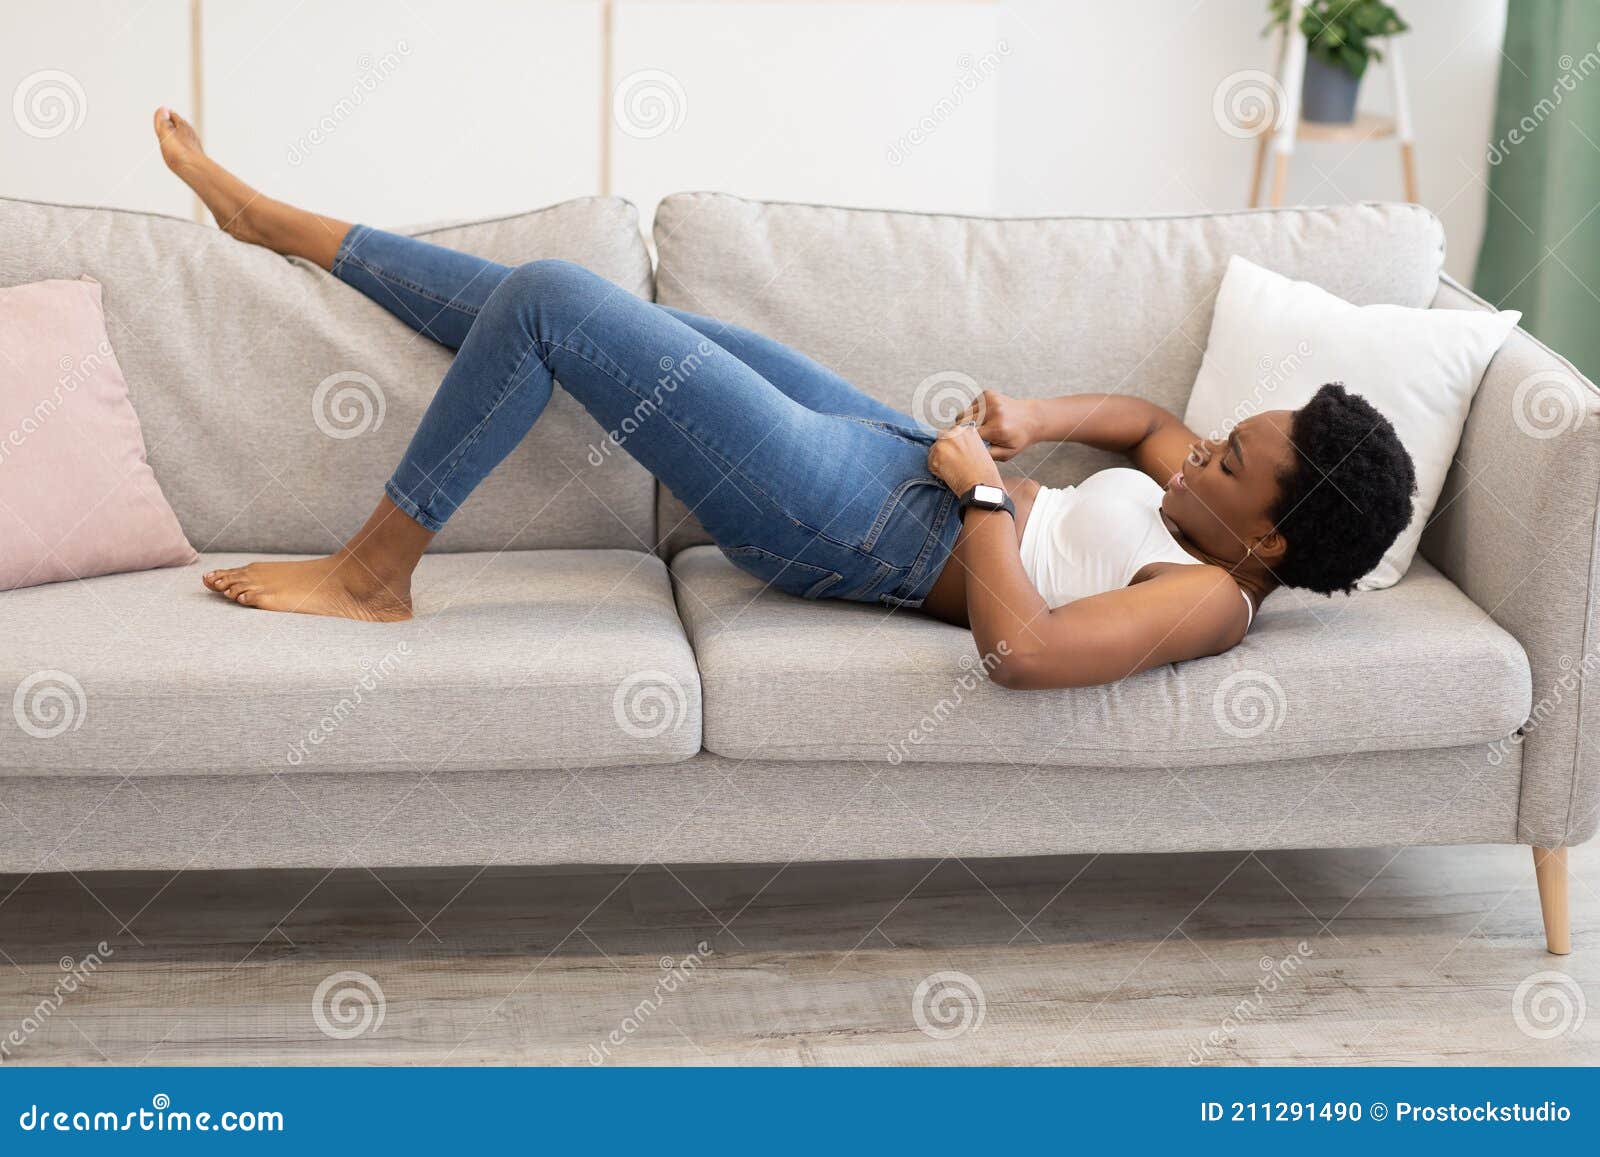 Black Woman Struggling Zipping Small Jeans Lying on Sofa Indoors Stock ...